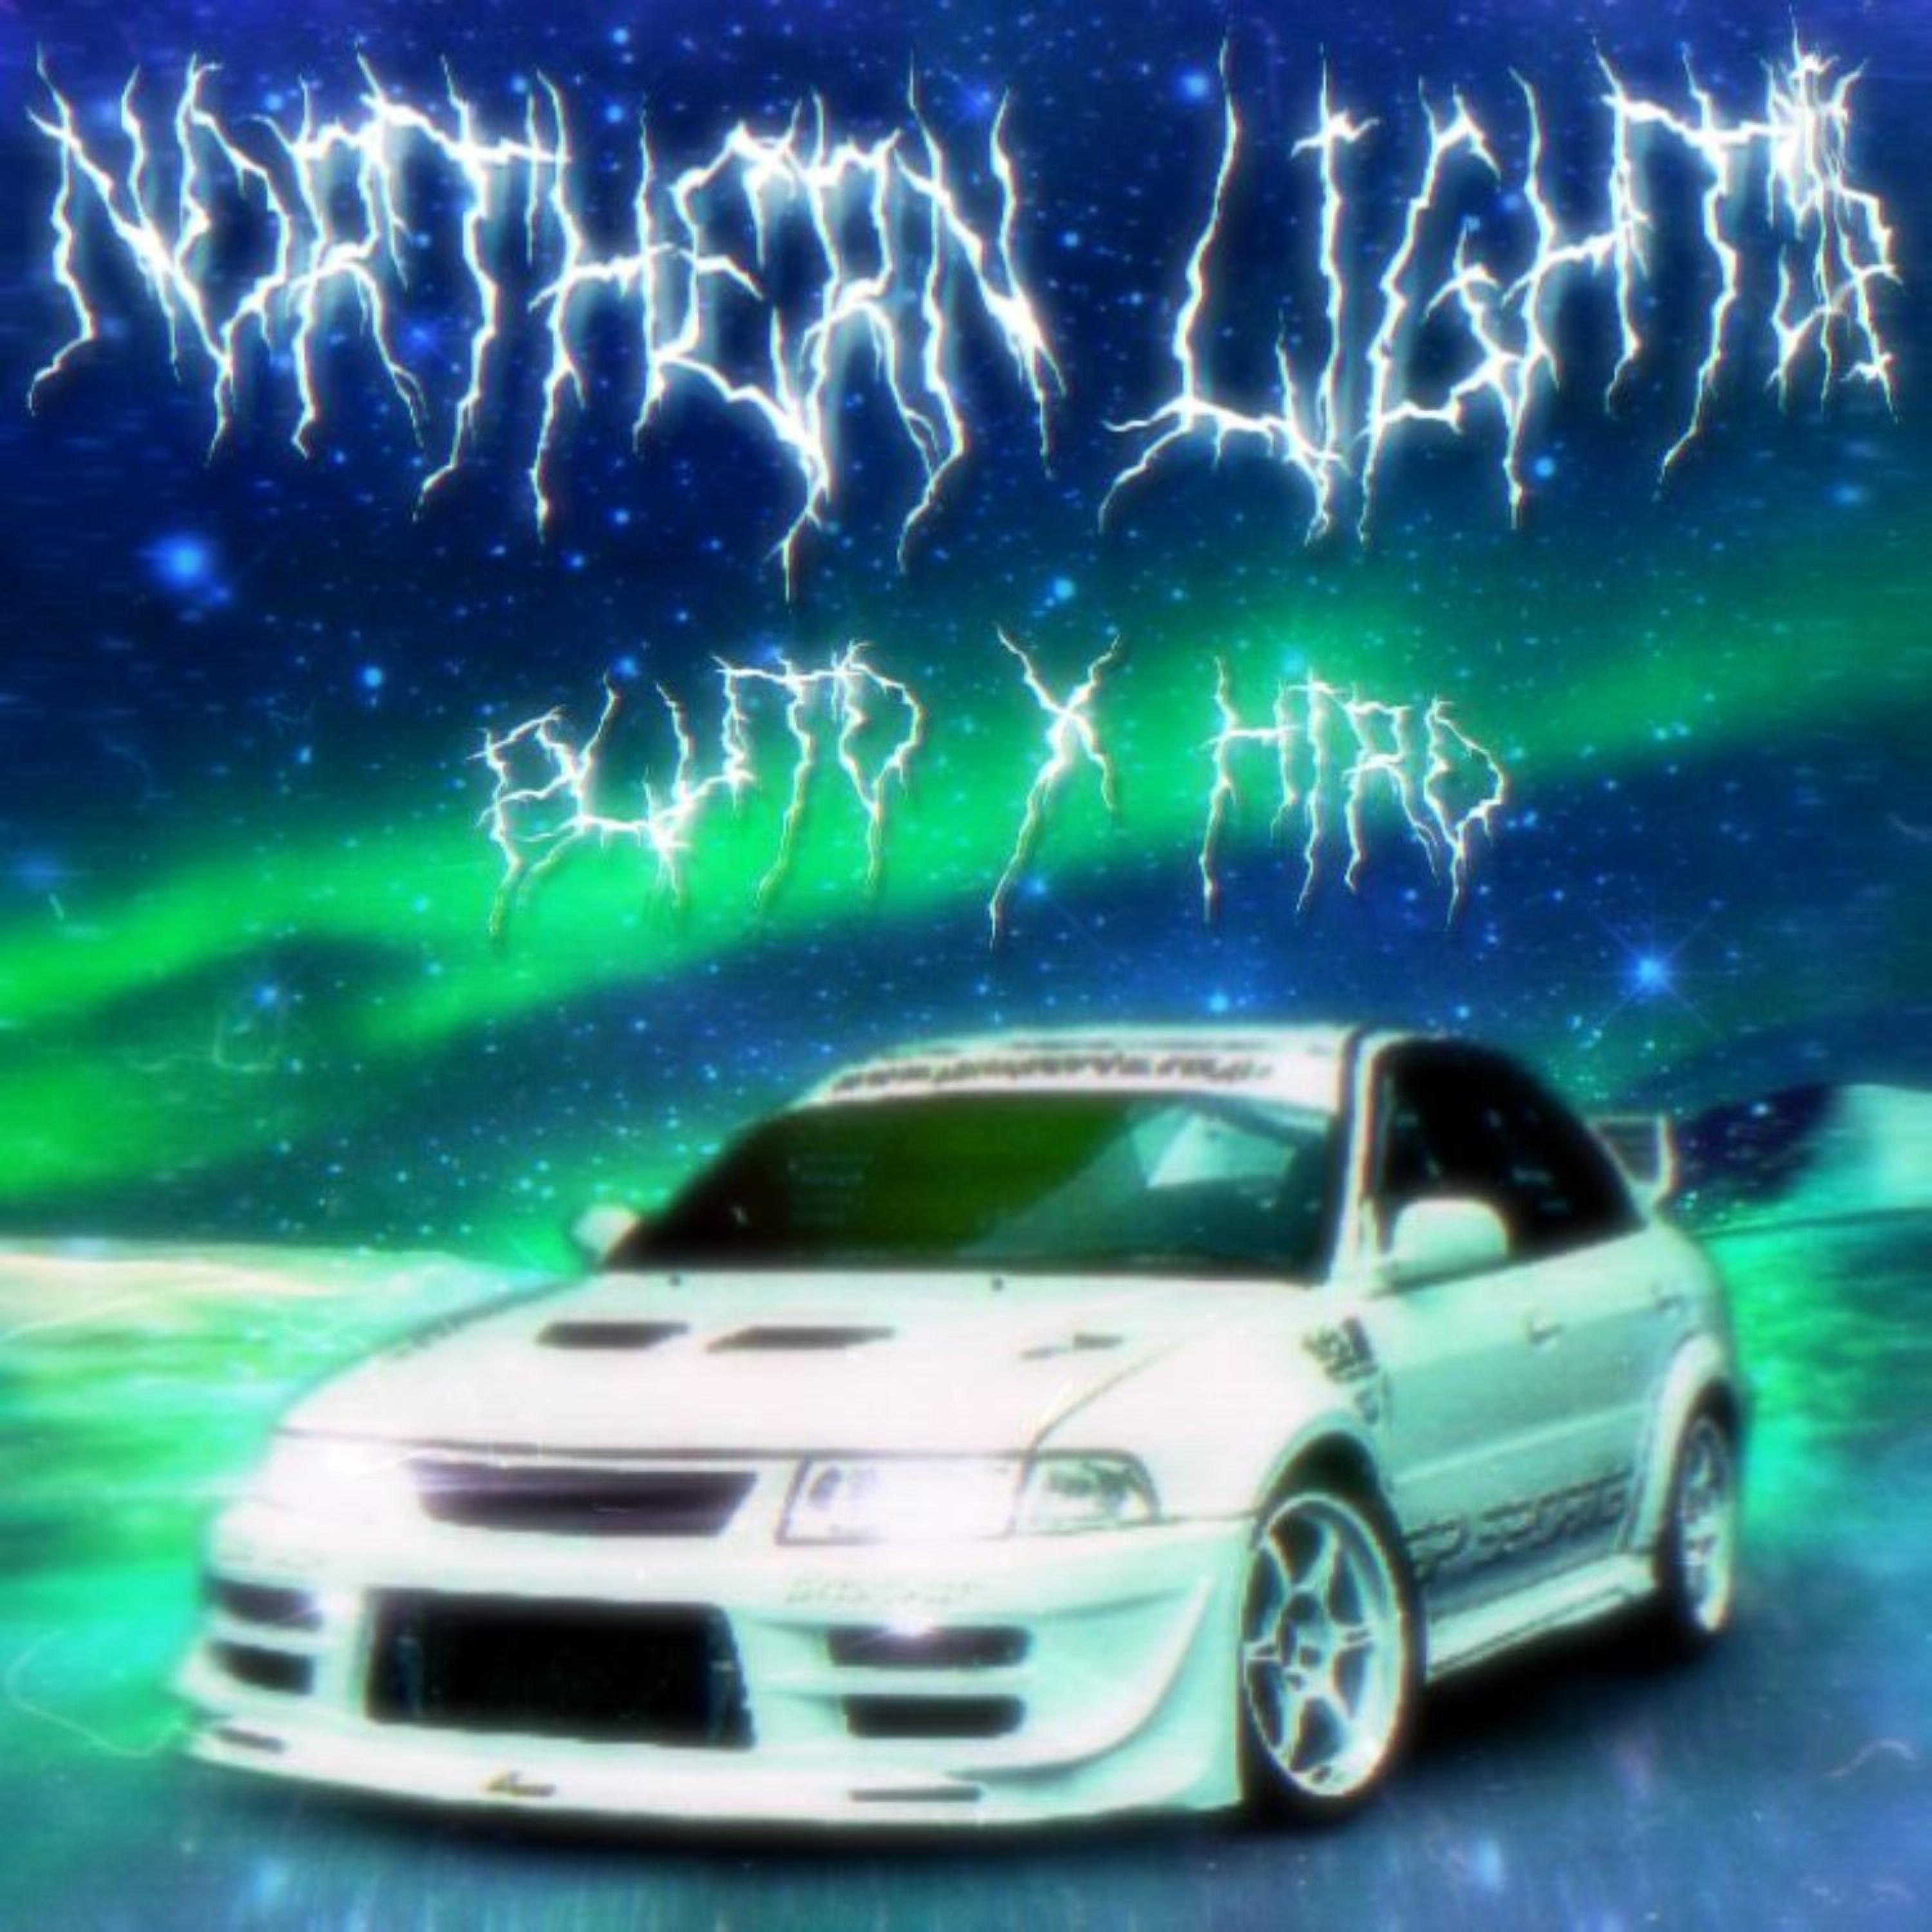 H1RX - NORTHERN LIGHT$ (feat. PLUTO!)